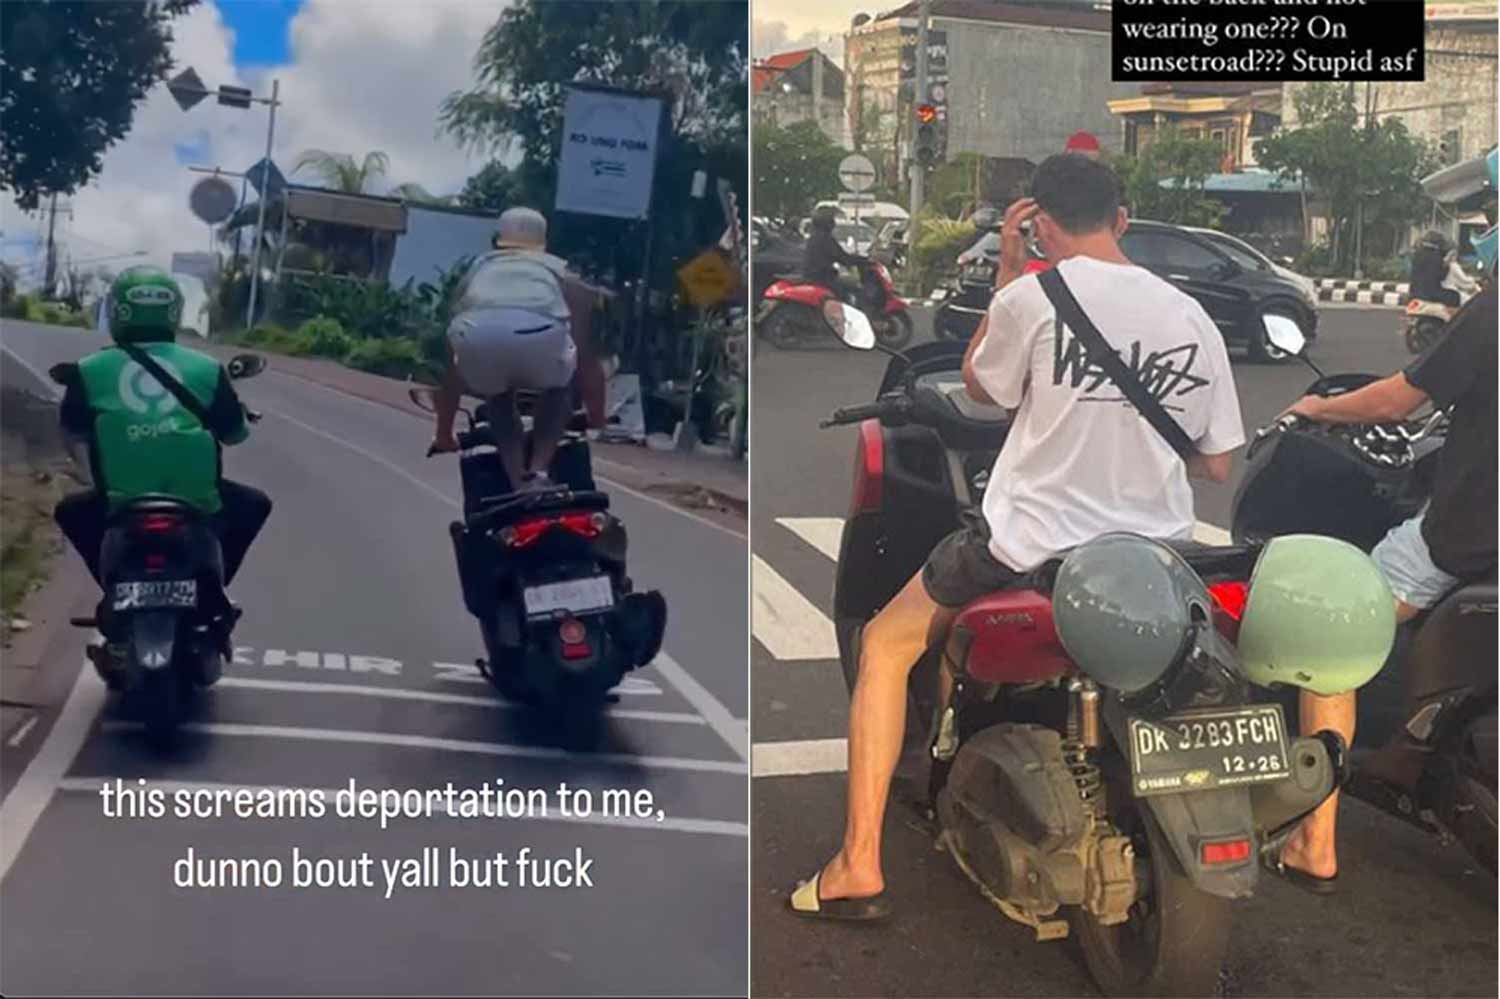 Scooter Death In Bali Prompts Fresh Calls For Tourists To Wear Helmets